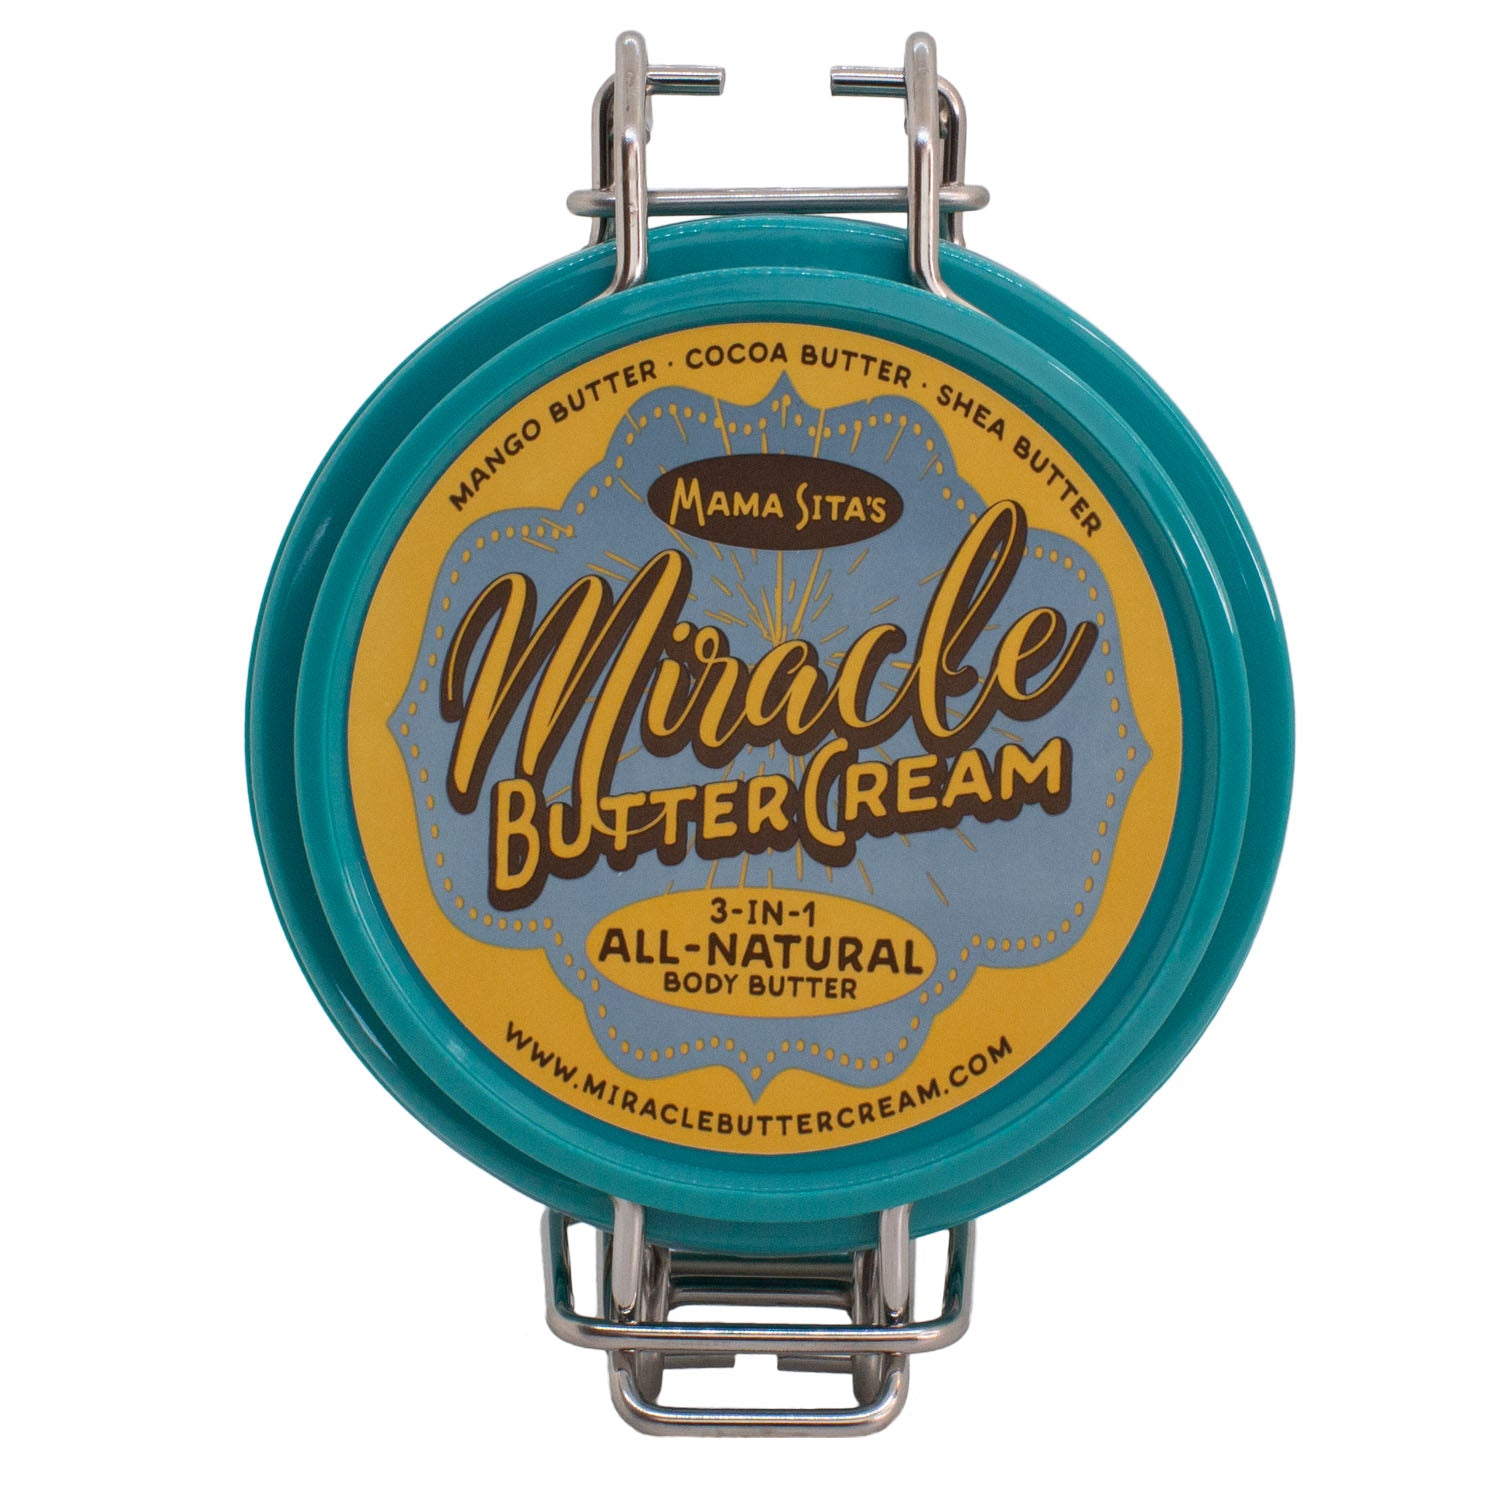 Amber Miracle Butter Cream 4 oz. lid miraclebuttercream.com